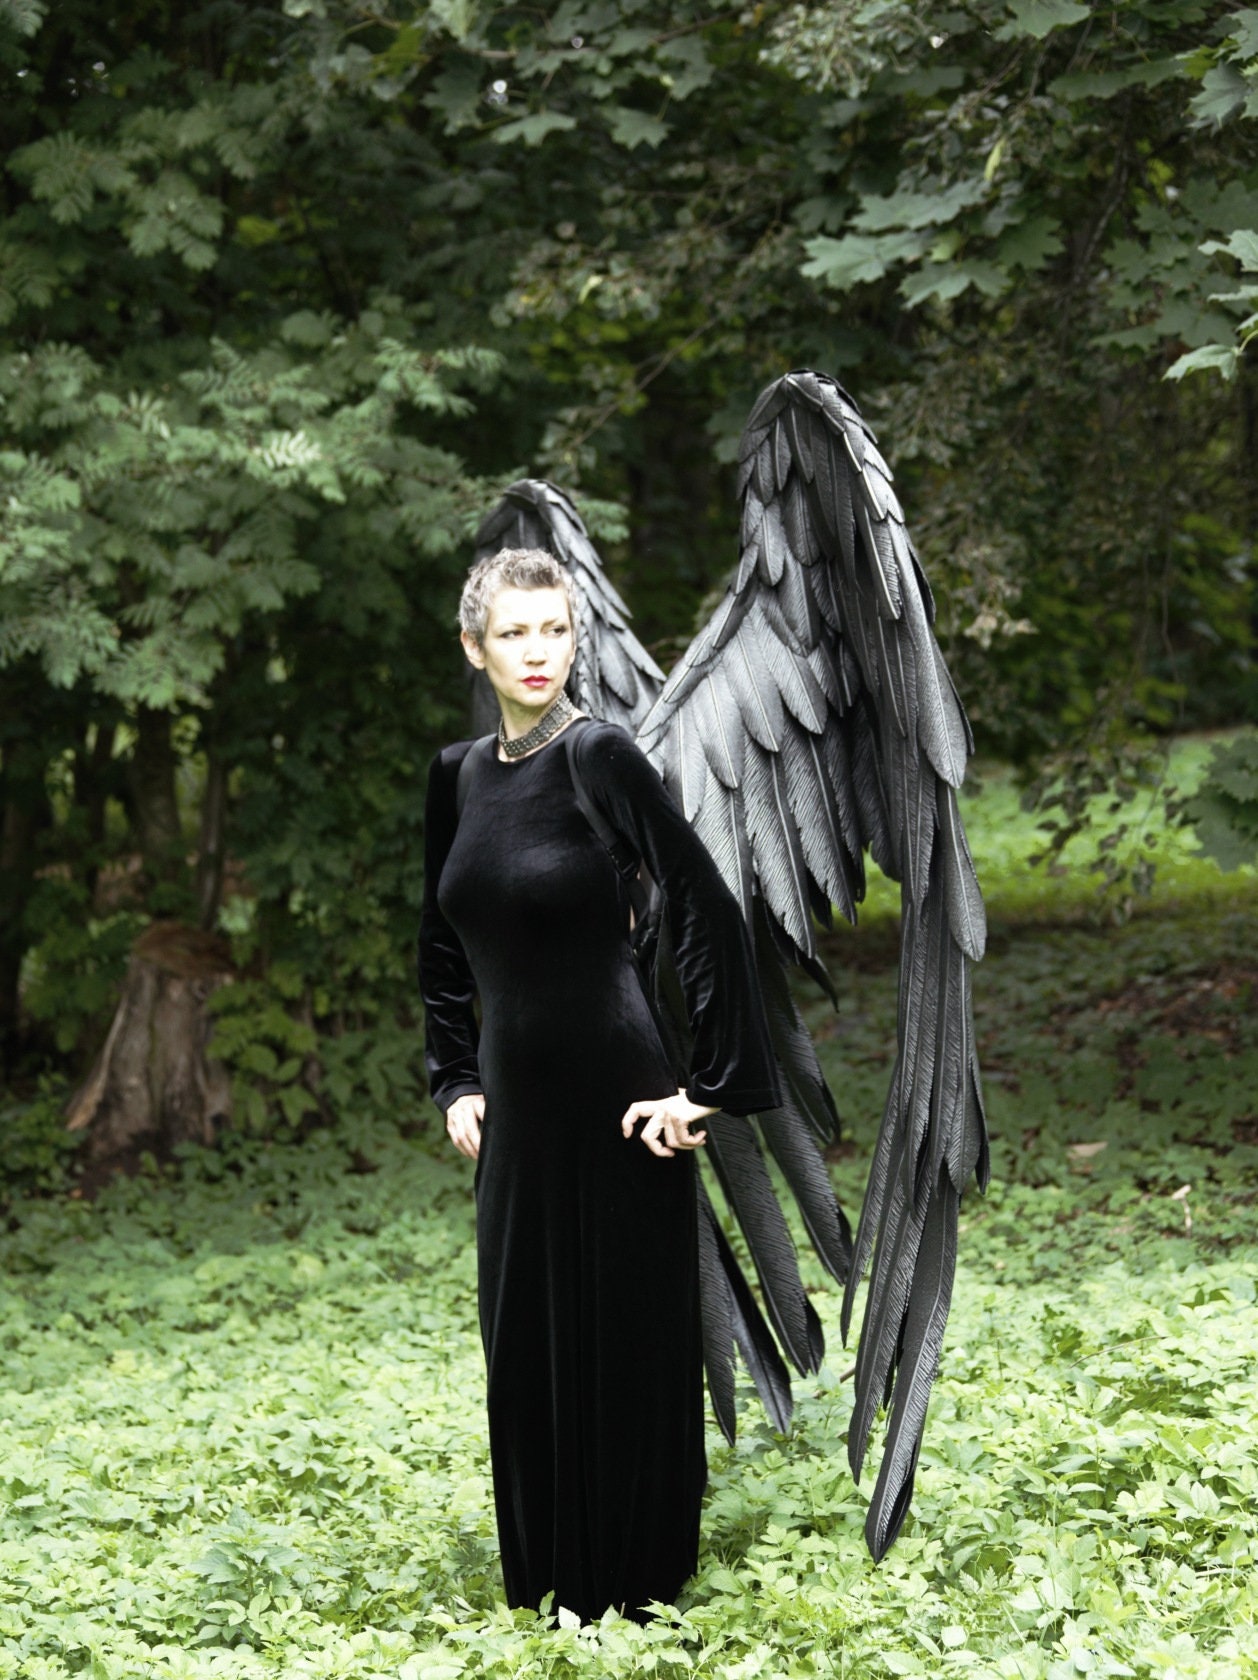 Large Black Crowley Wings Good Omens Cosplay Costume/ Photo - Etsy